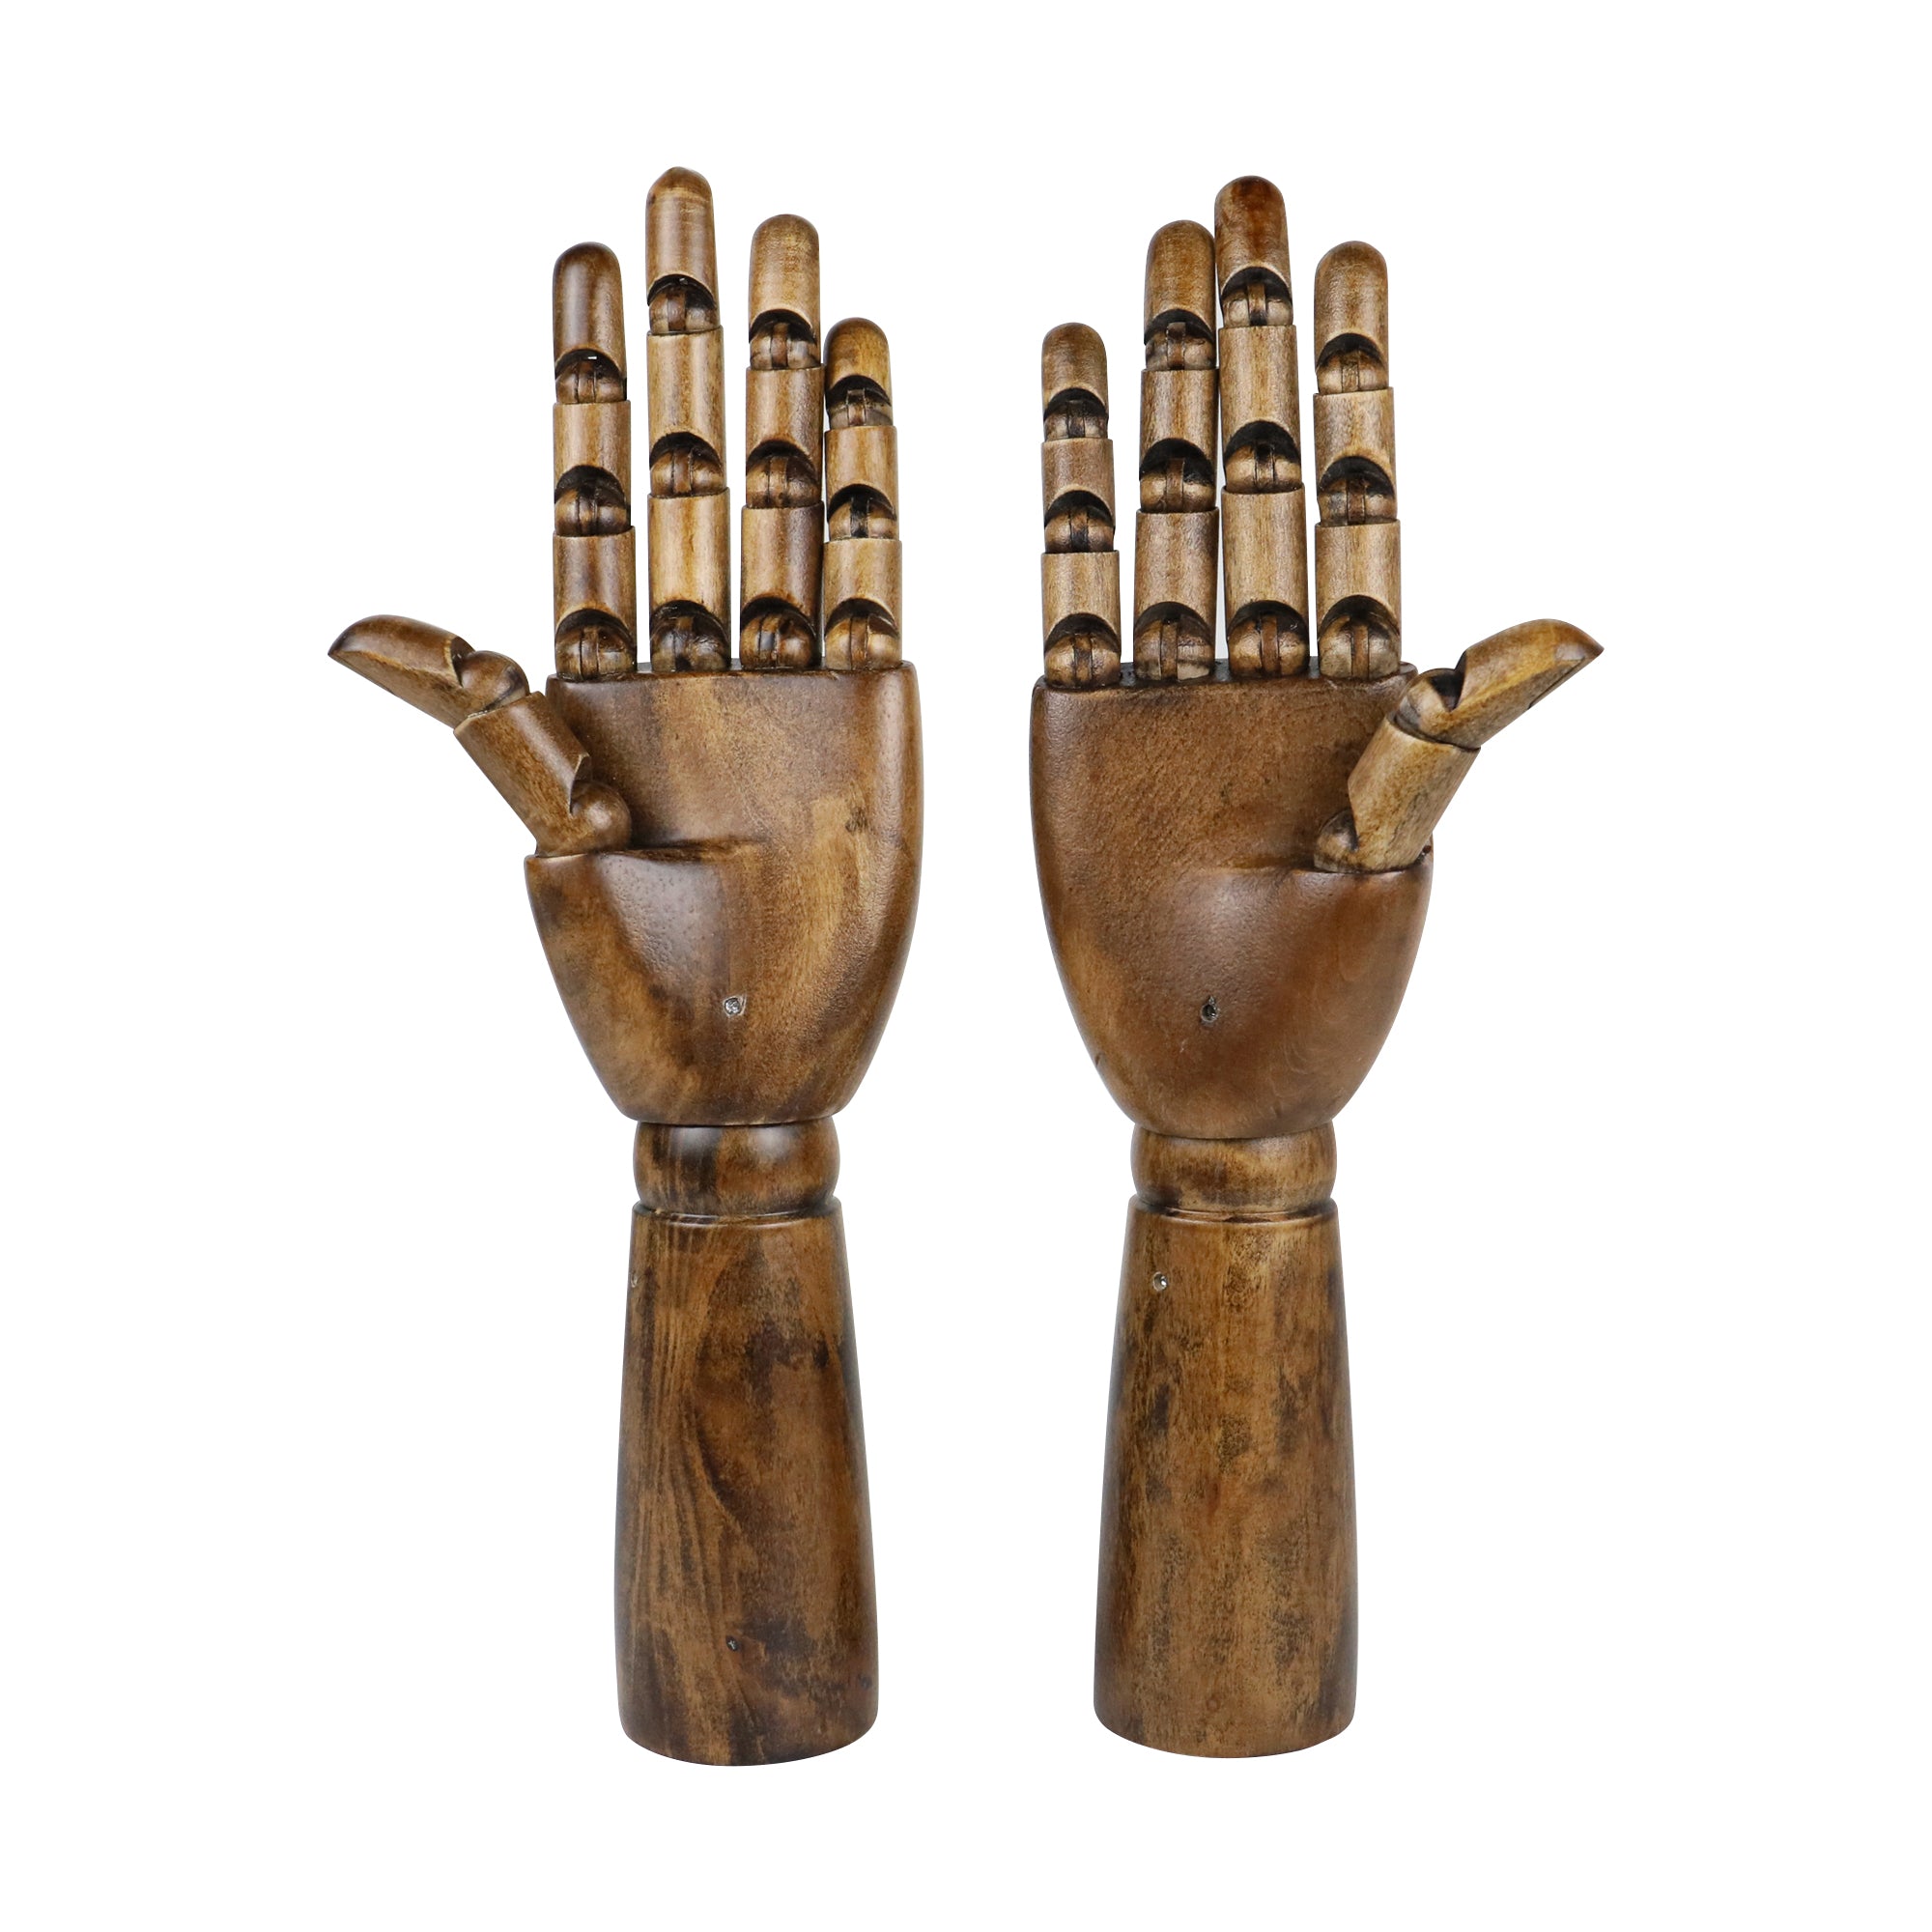 Practice Hand for Acrylic Nailsplastic Right Hand Mannequin,wood Grain  Effect Fingers Manikin Hand Model, Jewelry Display Props Ring Holder -   Hong Kong